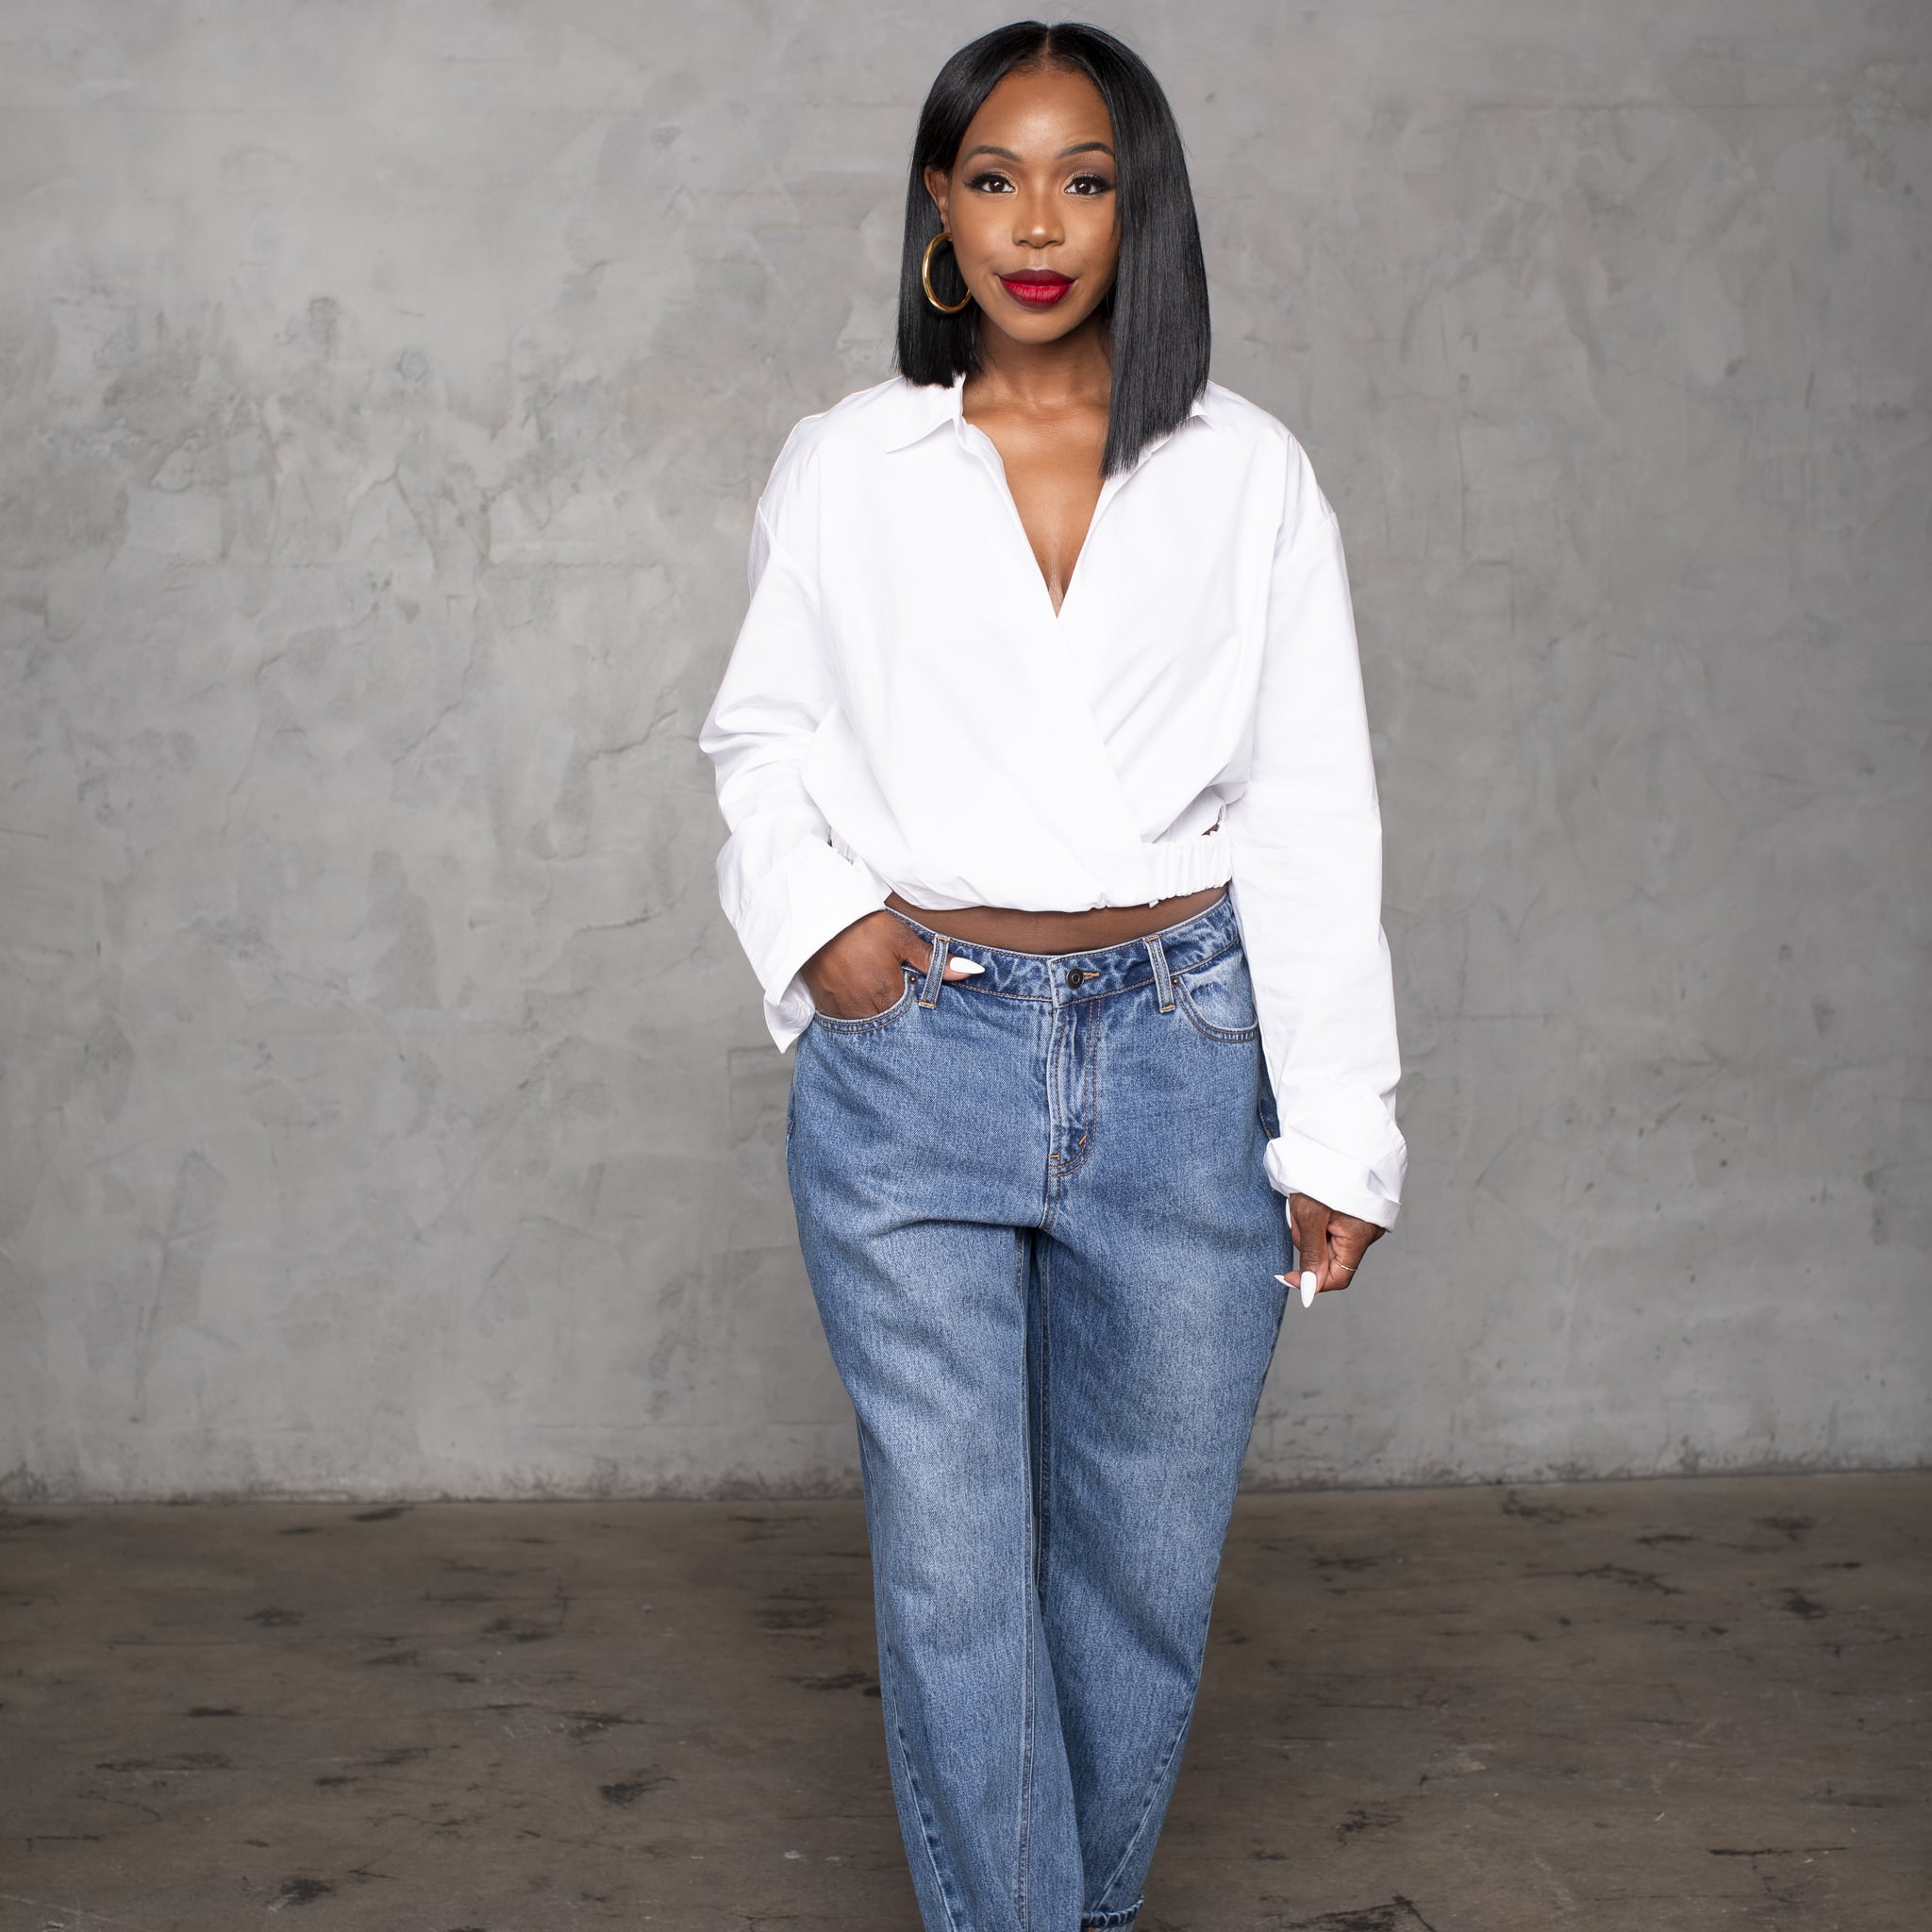 Kahlana Barfield Brown Struts Her Style as the First Design Partner of  Target's 'Future Collective' Clothing Brand